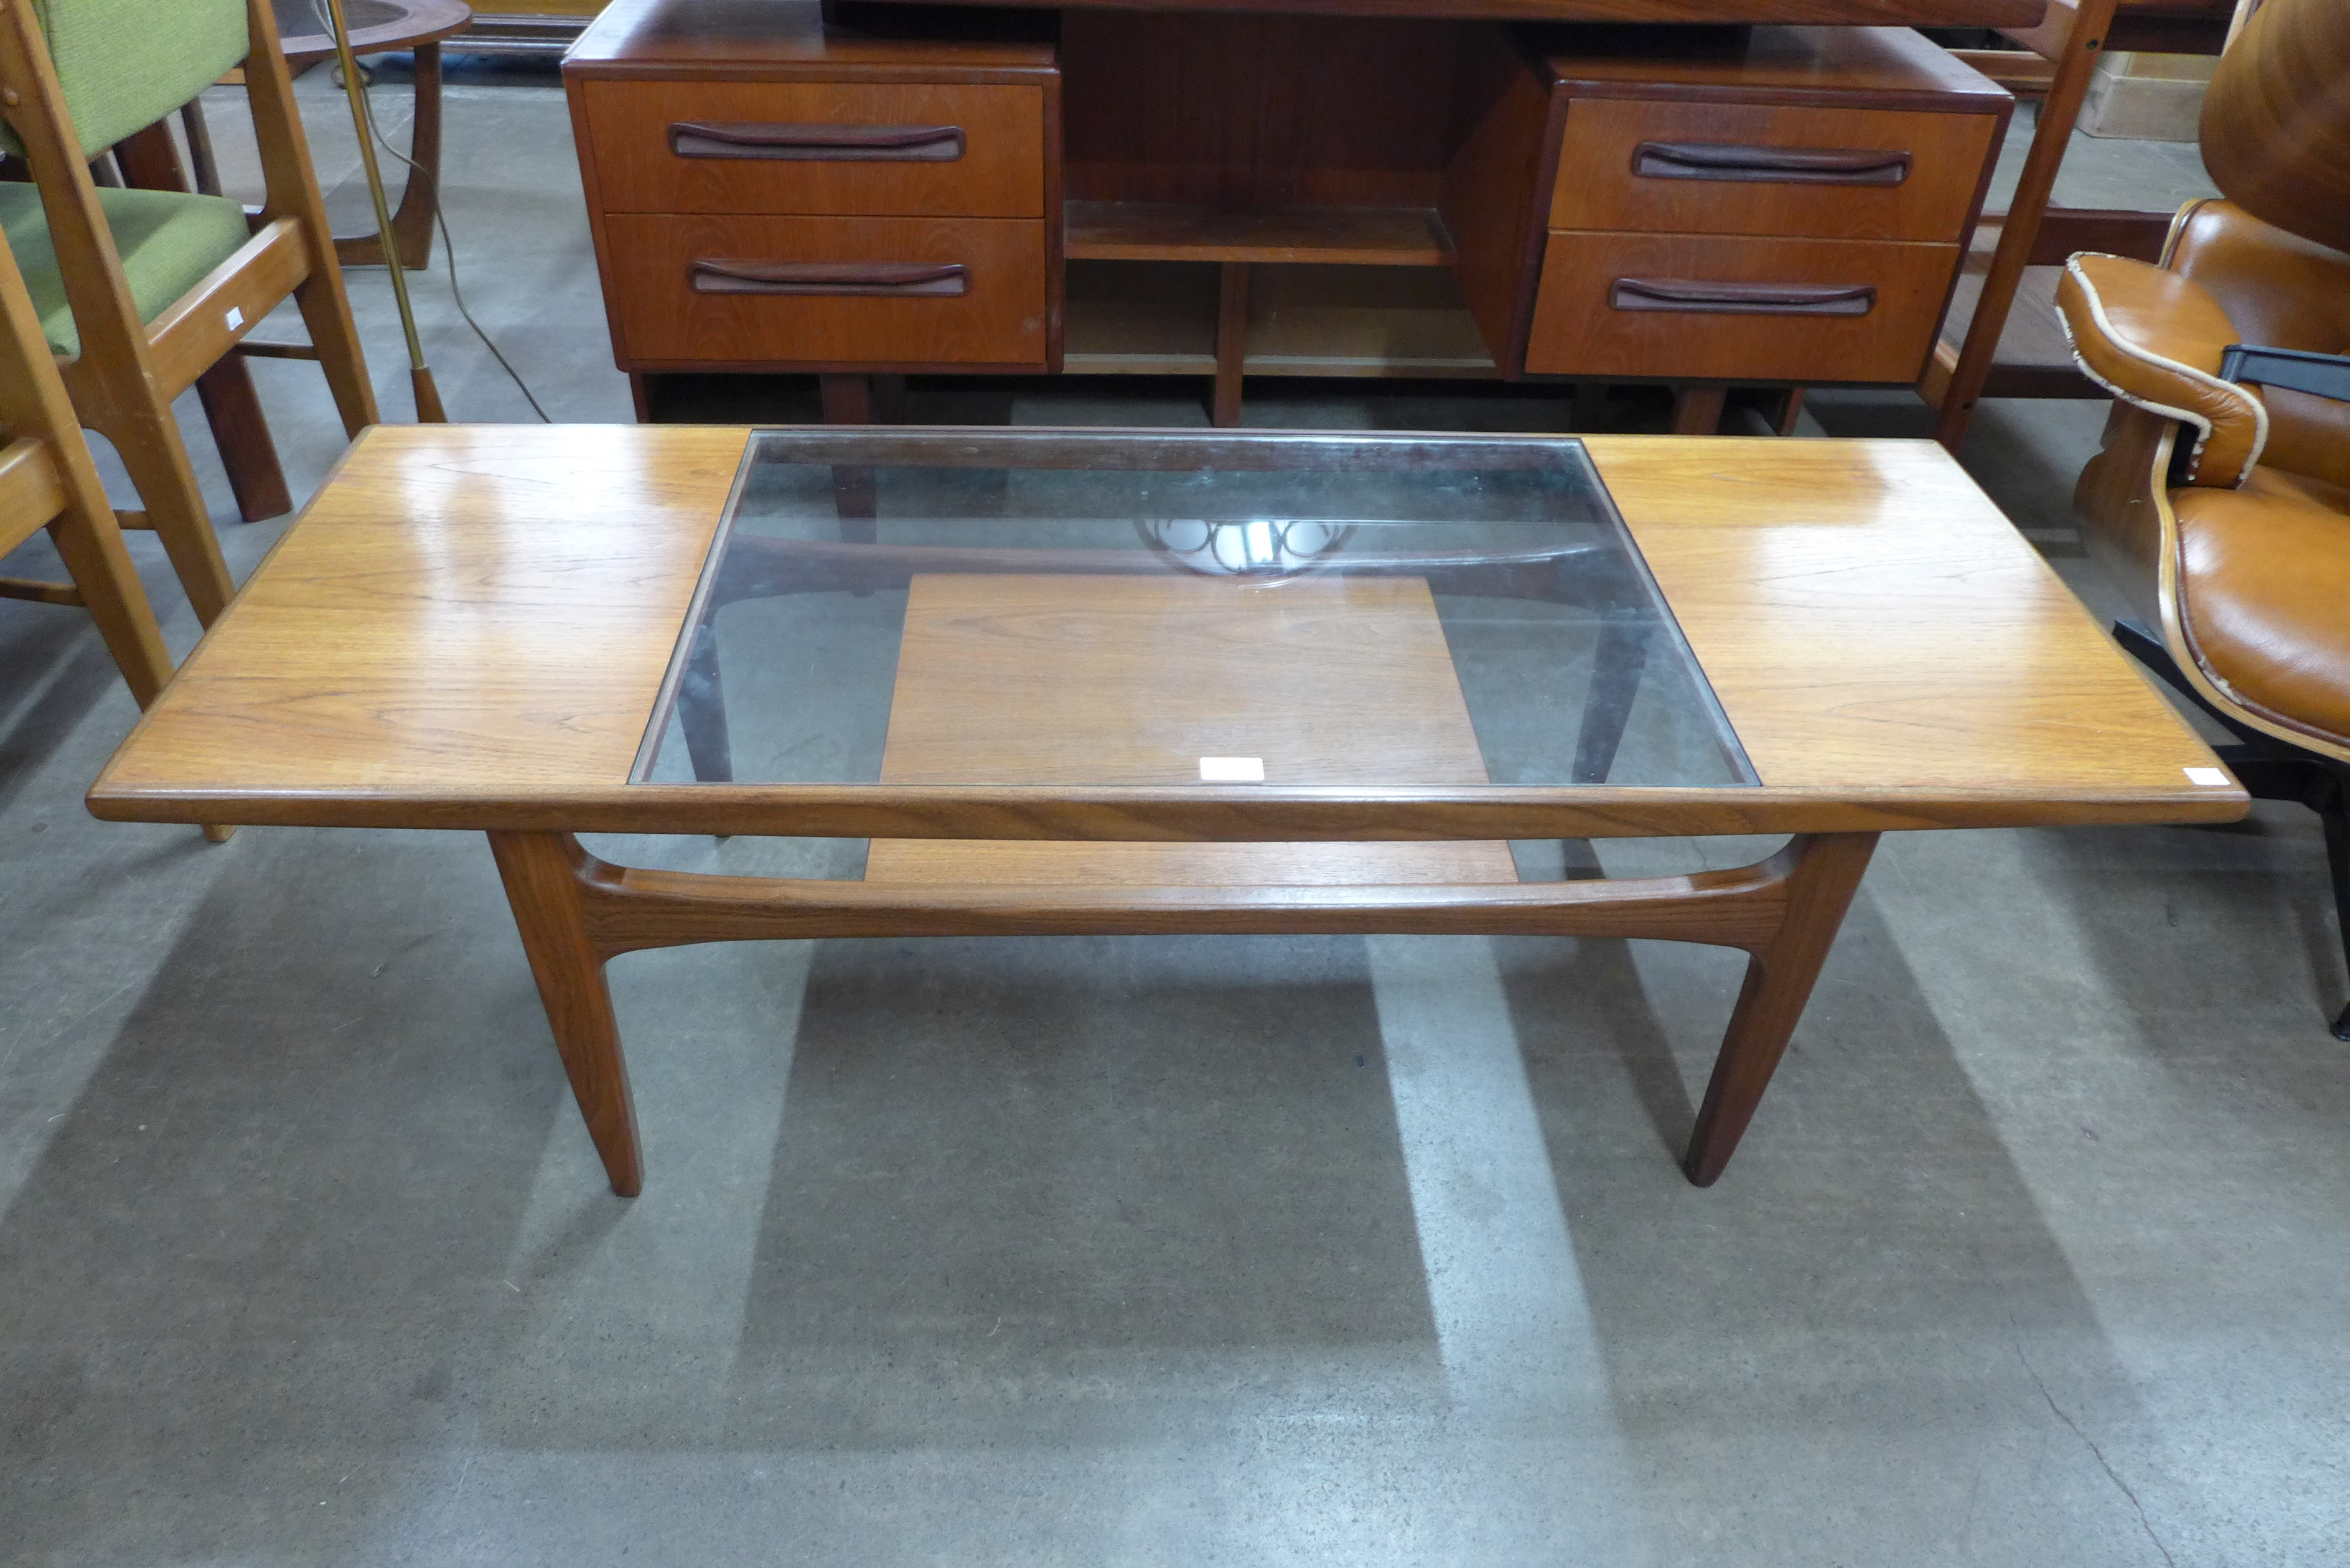 A G-Plan Fresco teak and glass topped coffee table